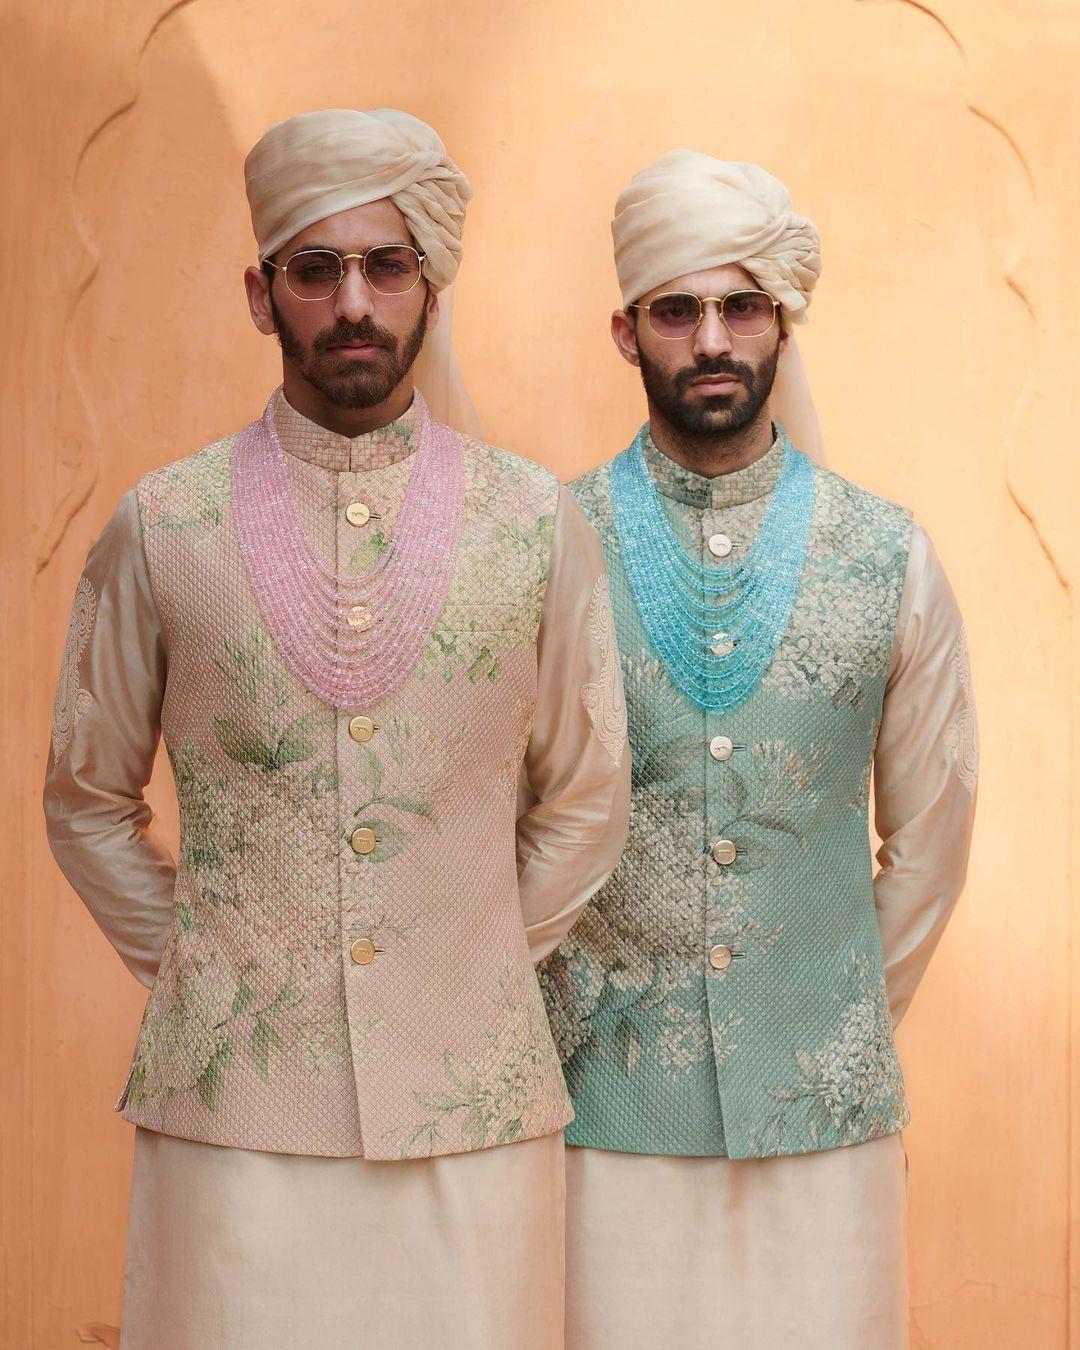 40 Top Indian Engagement Dresses for Men ||Latest Groom Dress Ideas For  Engagement Party | Dress suits for men, Designer suits for men, Indian men  fashion